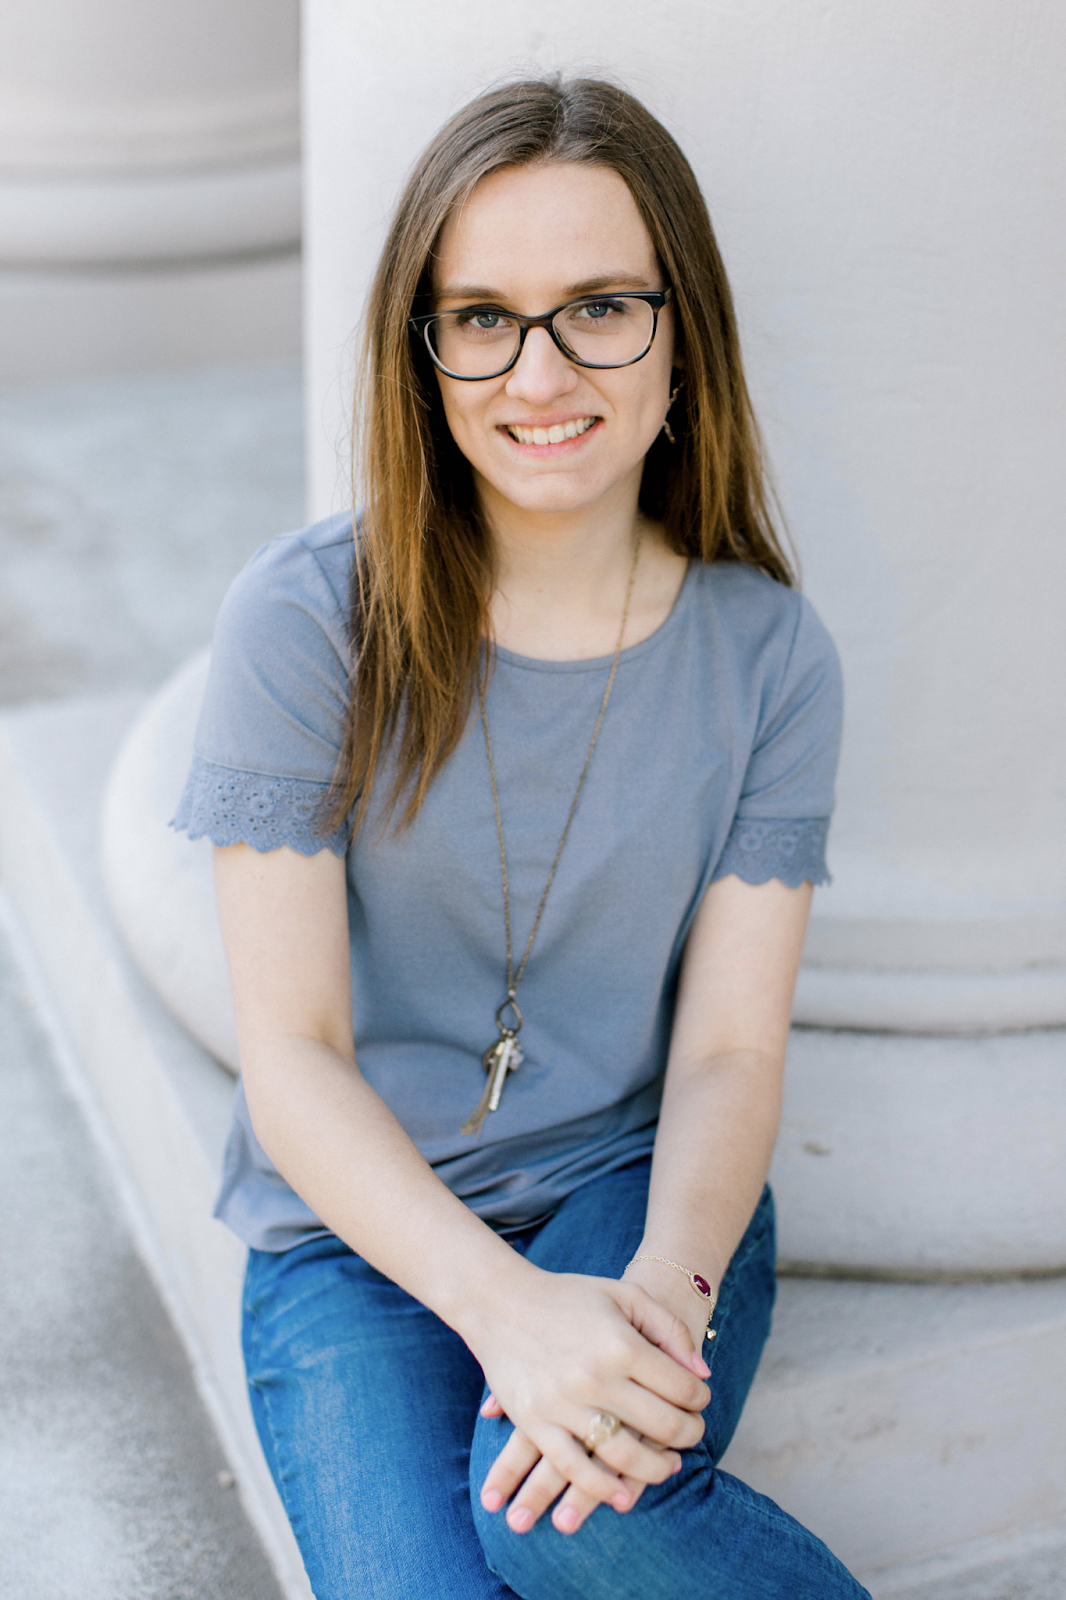 Darby Salge, a white woman in her twenties, is sitting and smiling at the camera. She is wearing brown glasses, a blue top, and blue jeans.